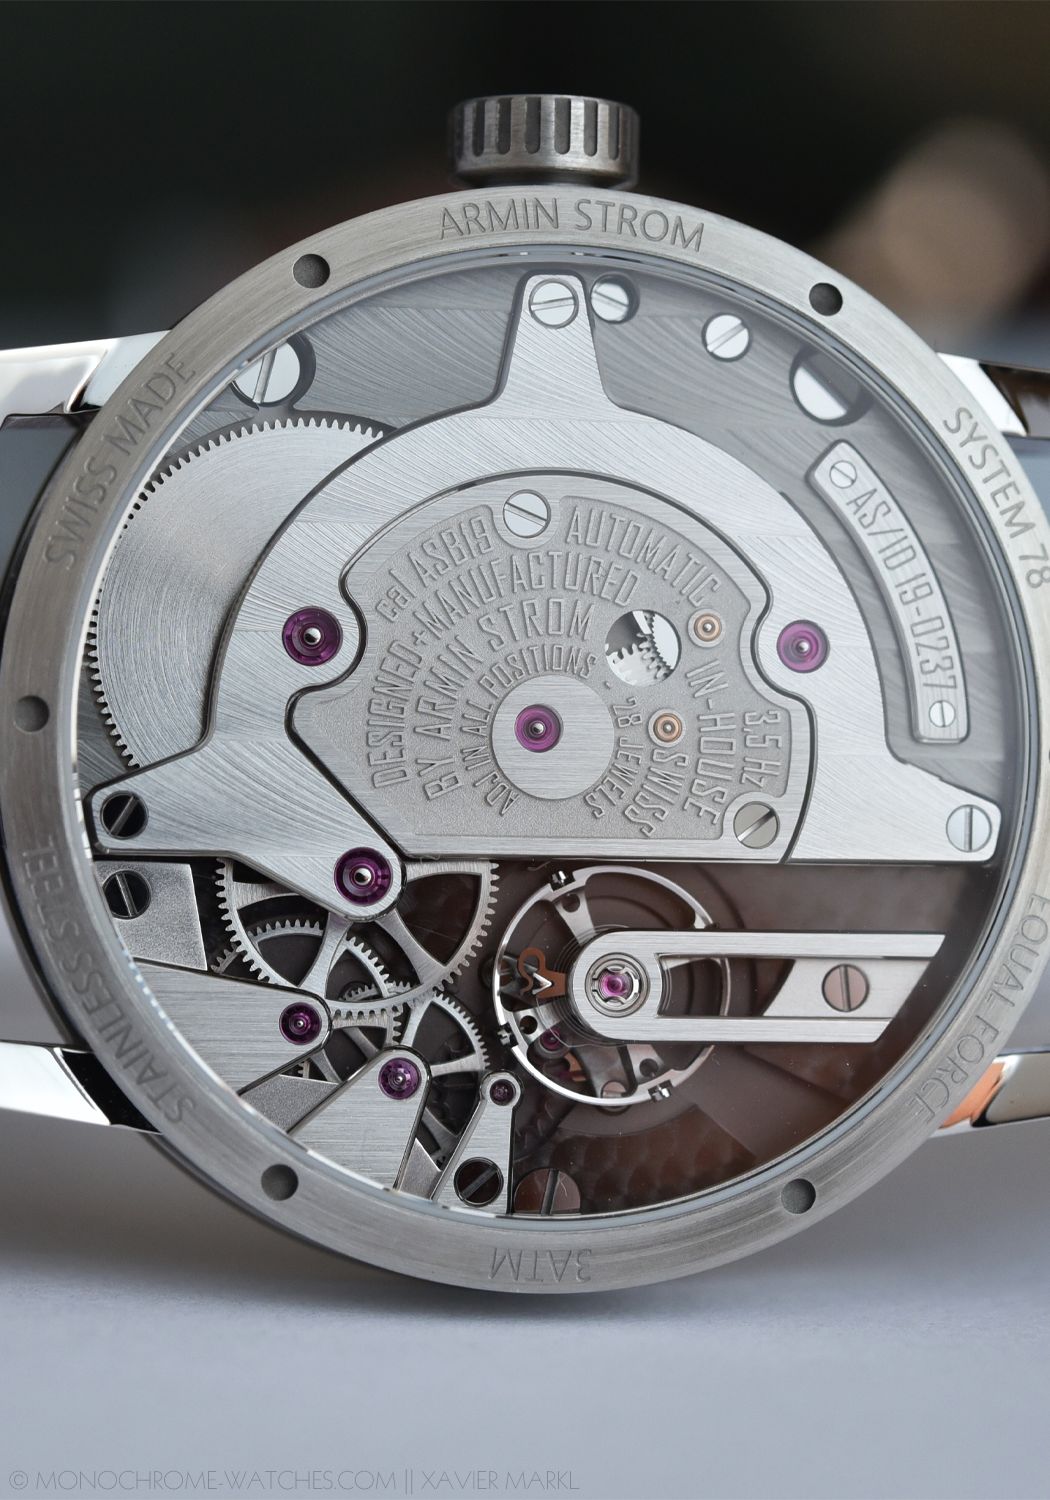 Armin Strom Gravity Equal Force 18KRG Oster Edition | Photo by Xavier Markl (Monochrome-Watches.com)